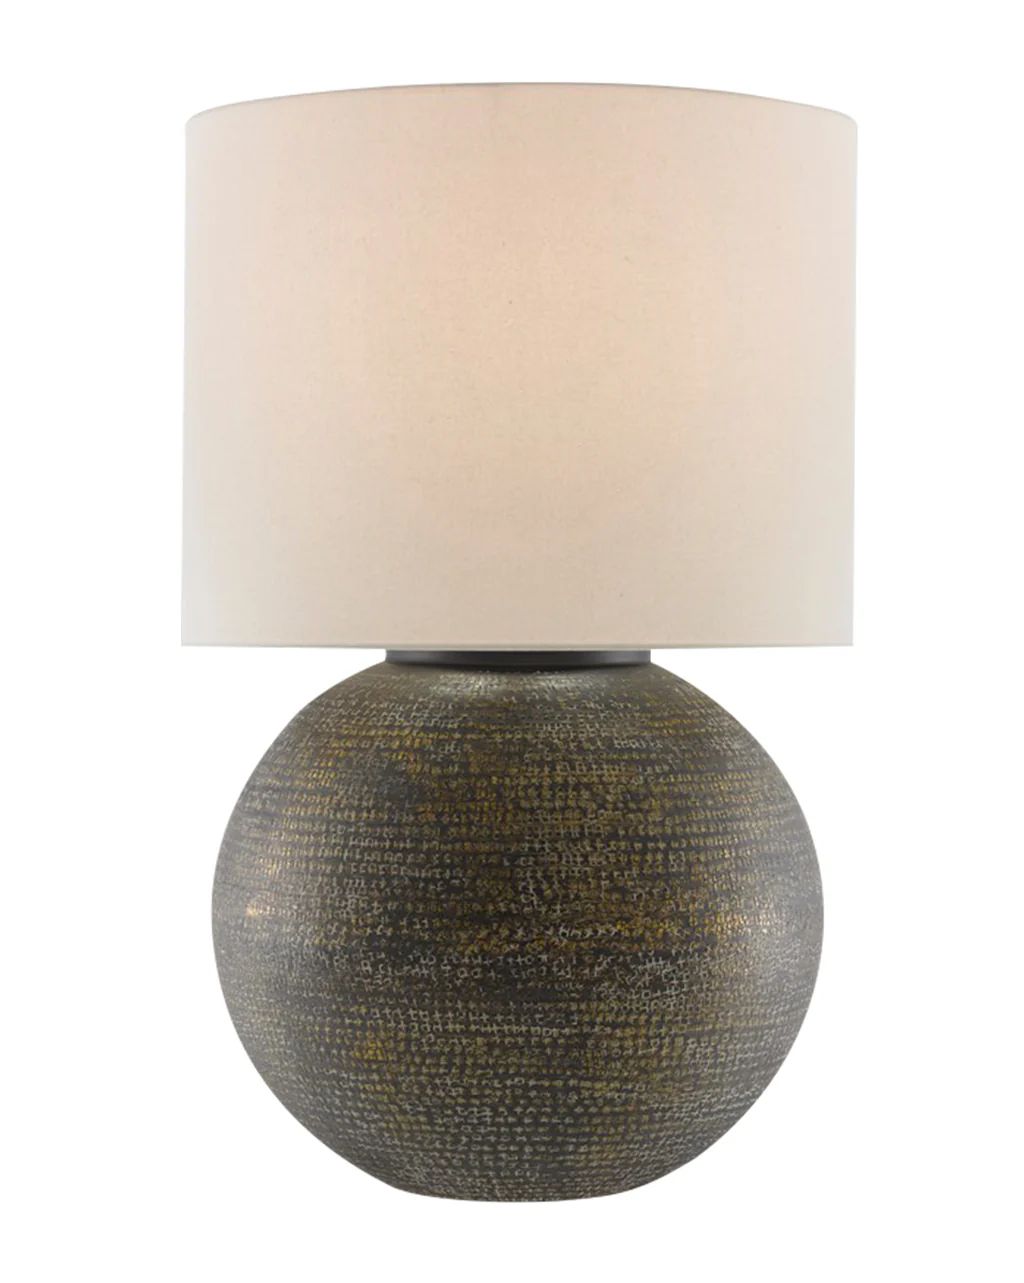 Brigands Table Lamp | McGee & Co.